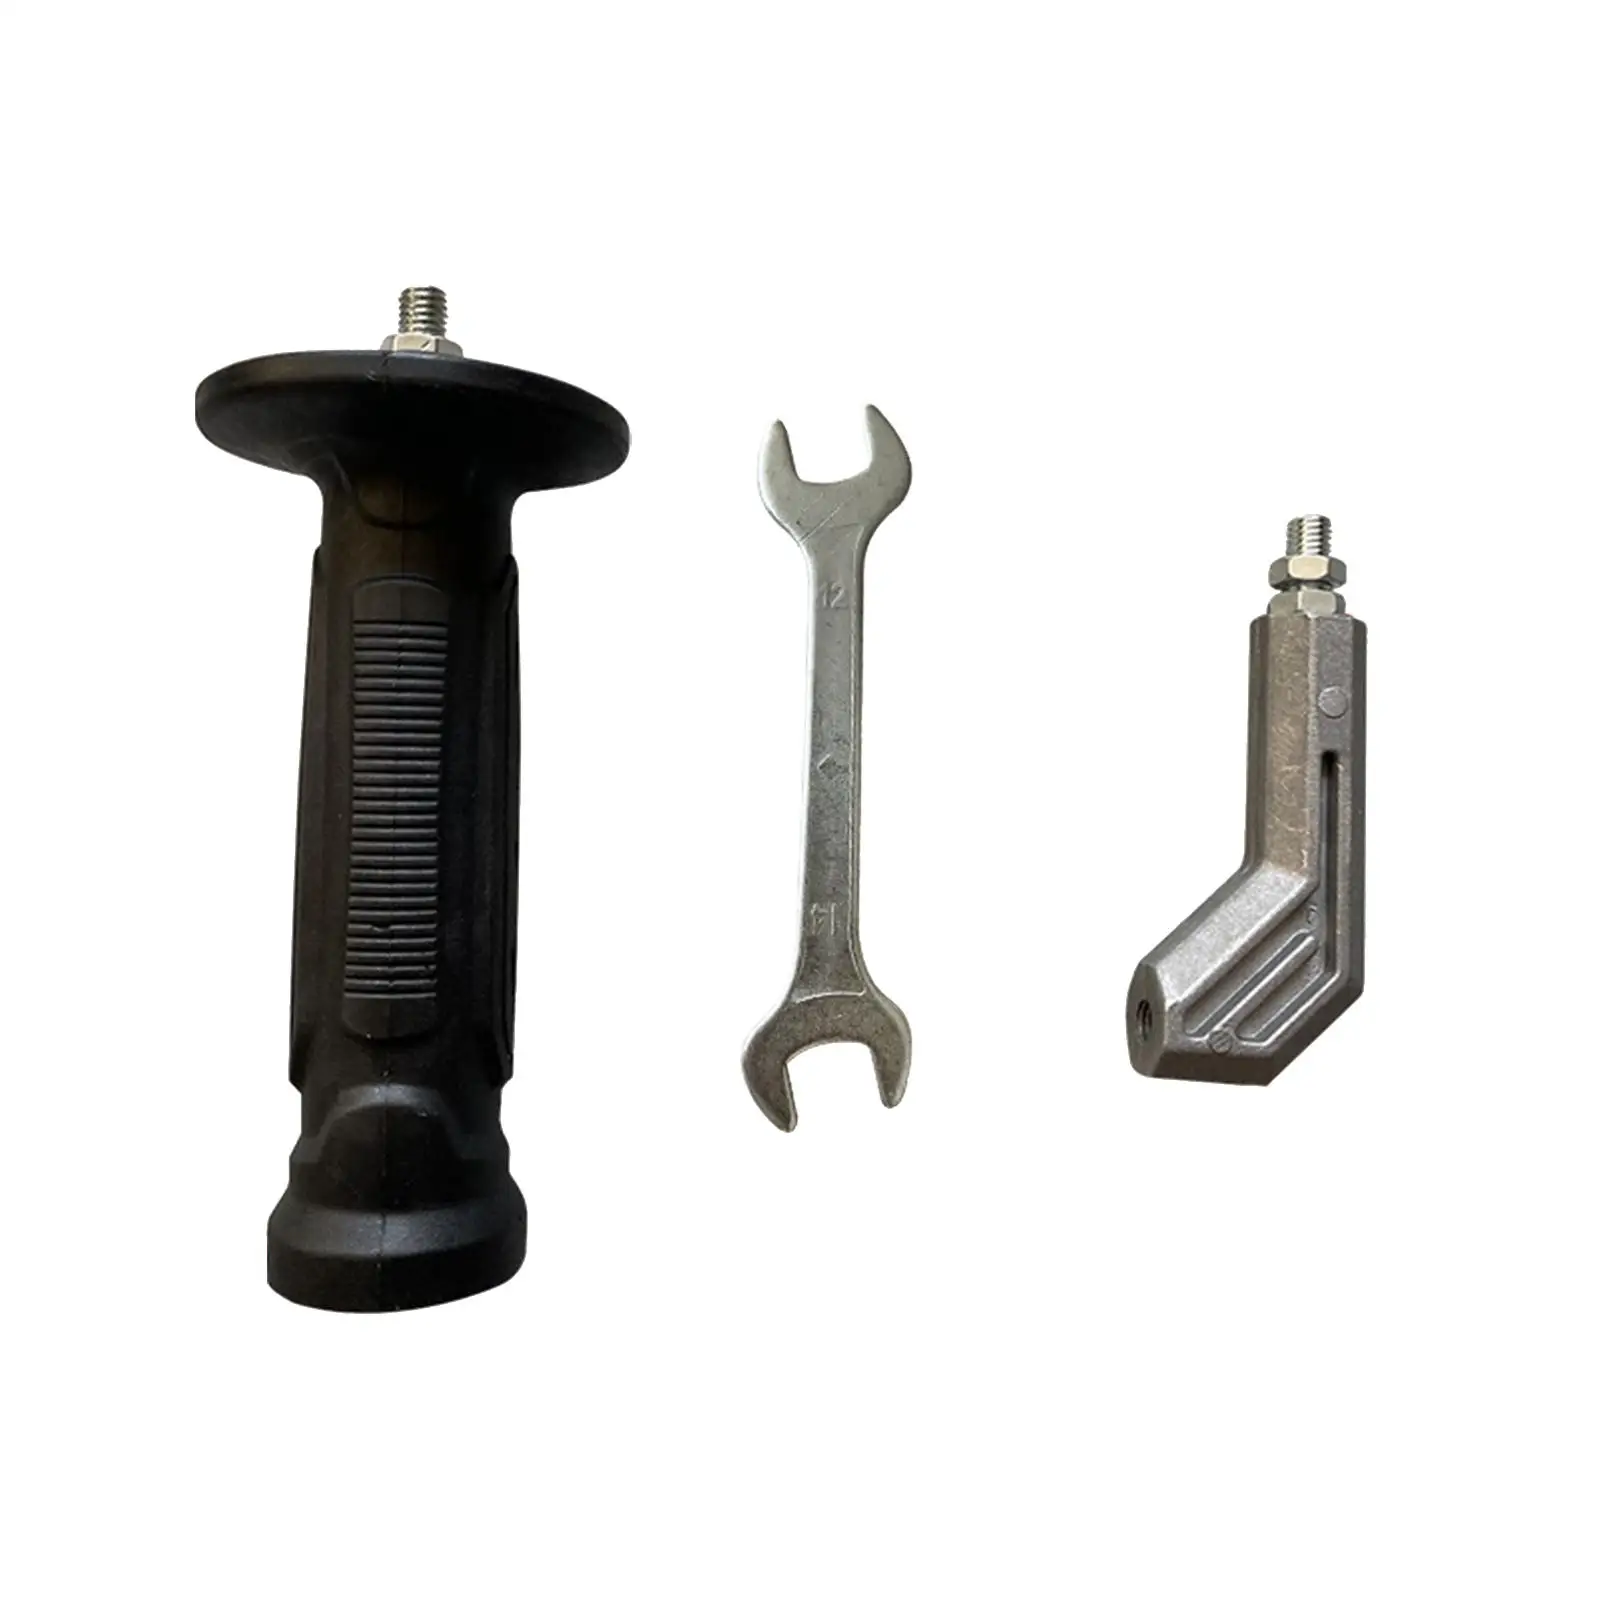 

Ergonomic Handle Grip for Angle Grinder - Improved Replacement Part for Enhanced Control